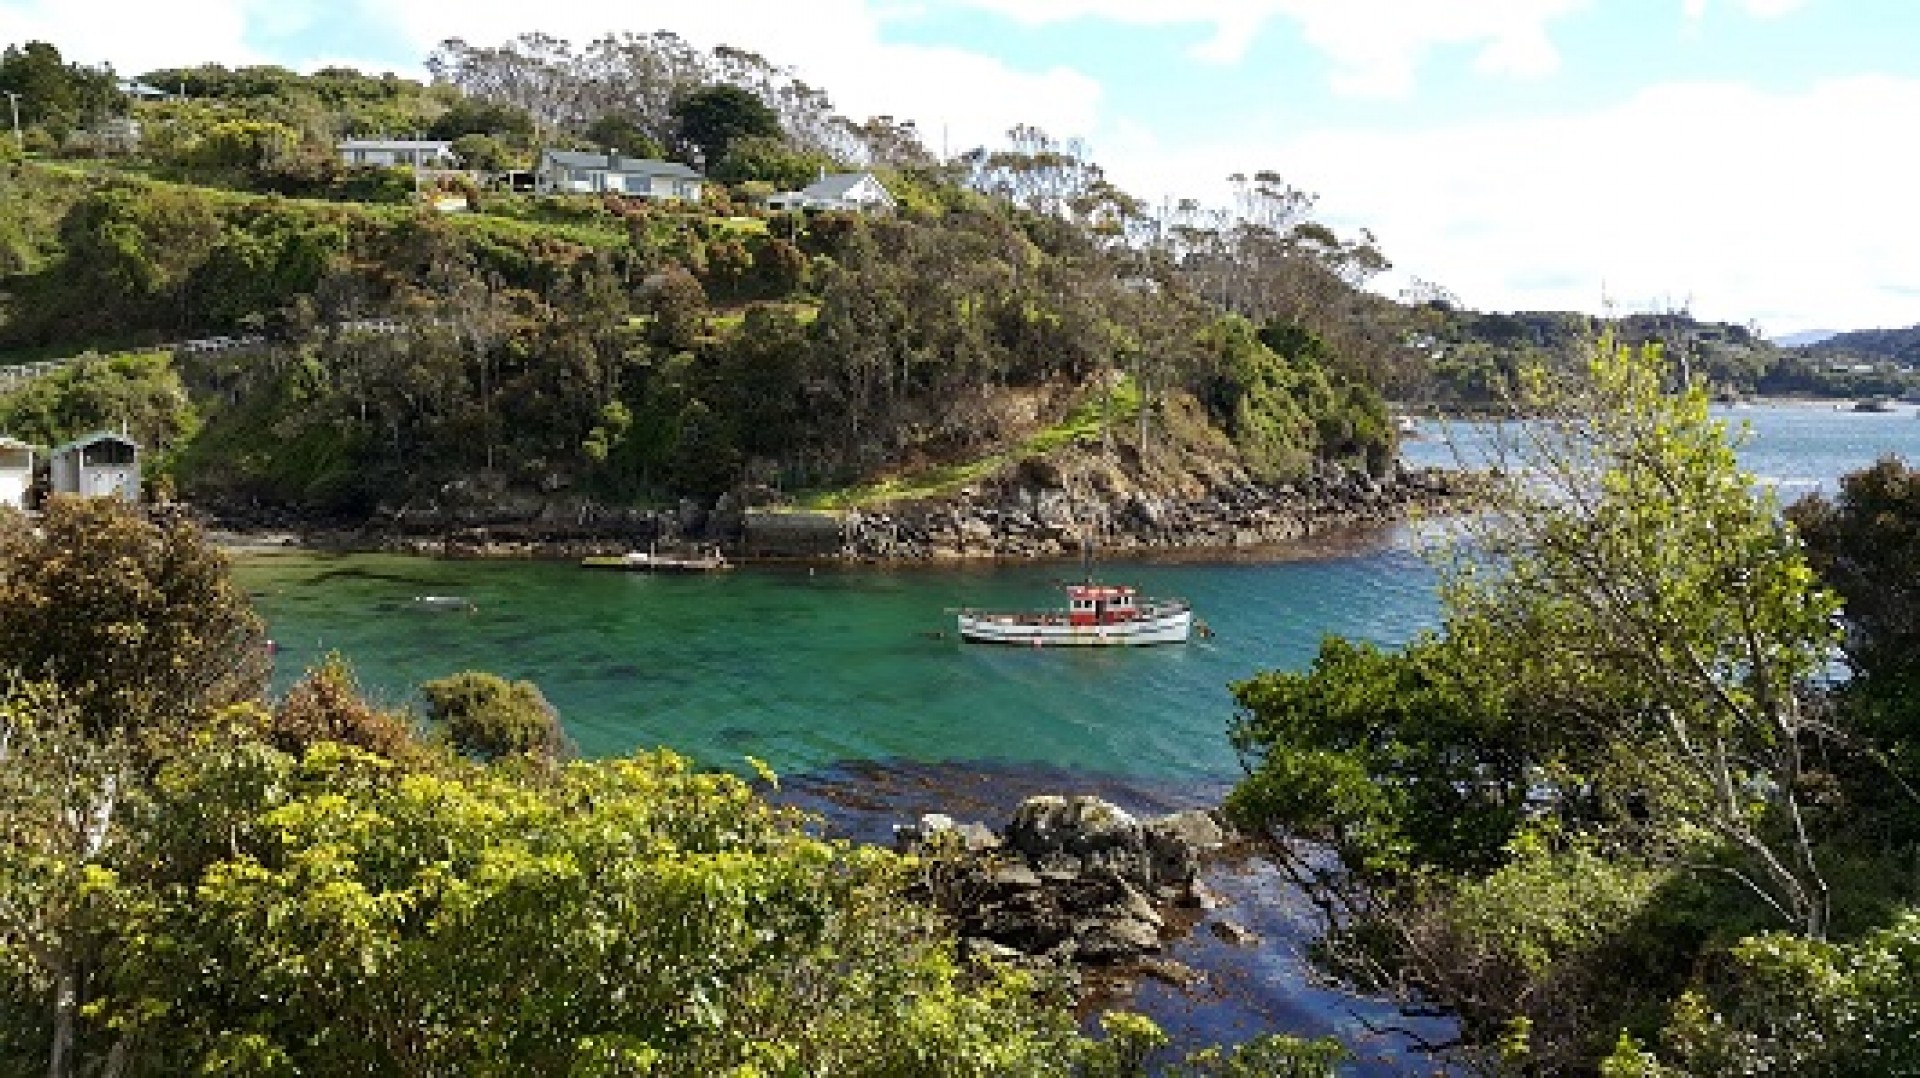 South of the South, Stunning Stewart Island